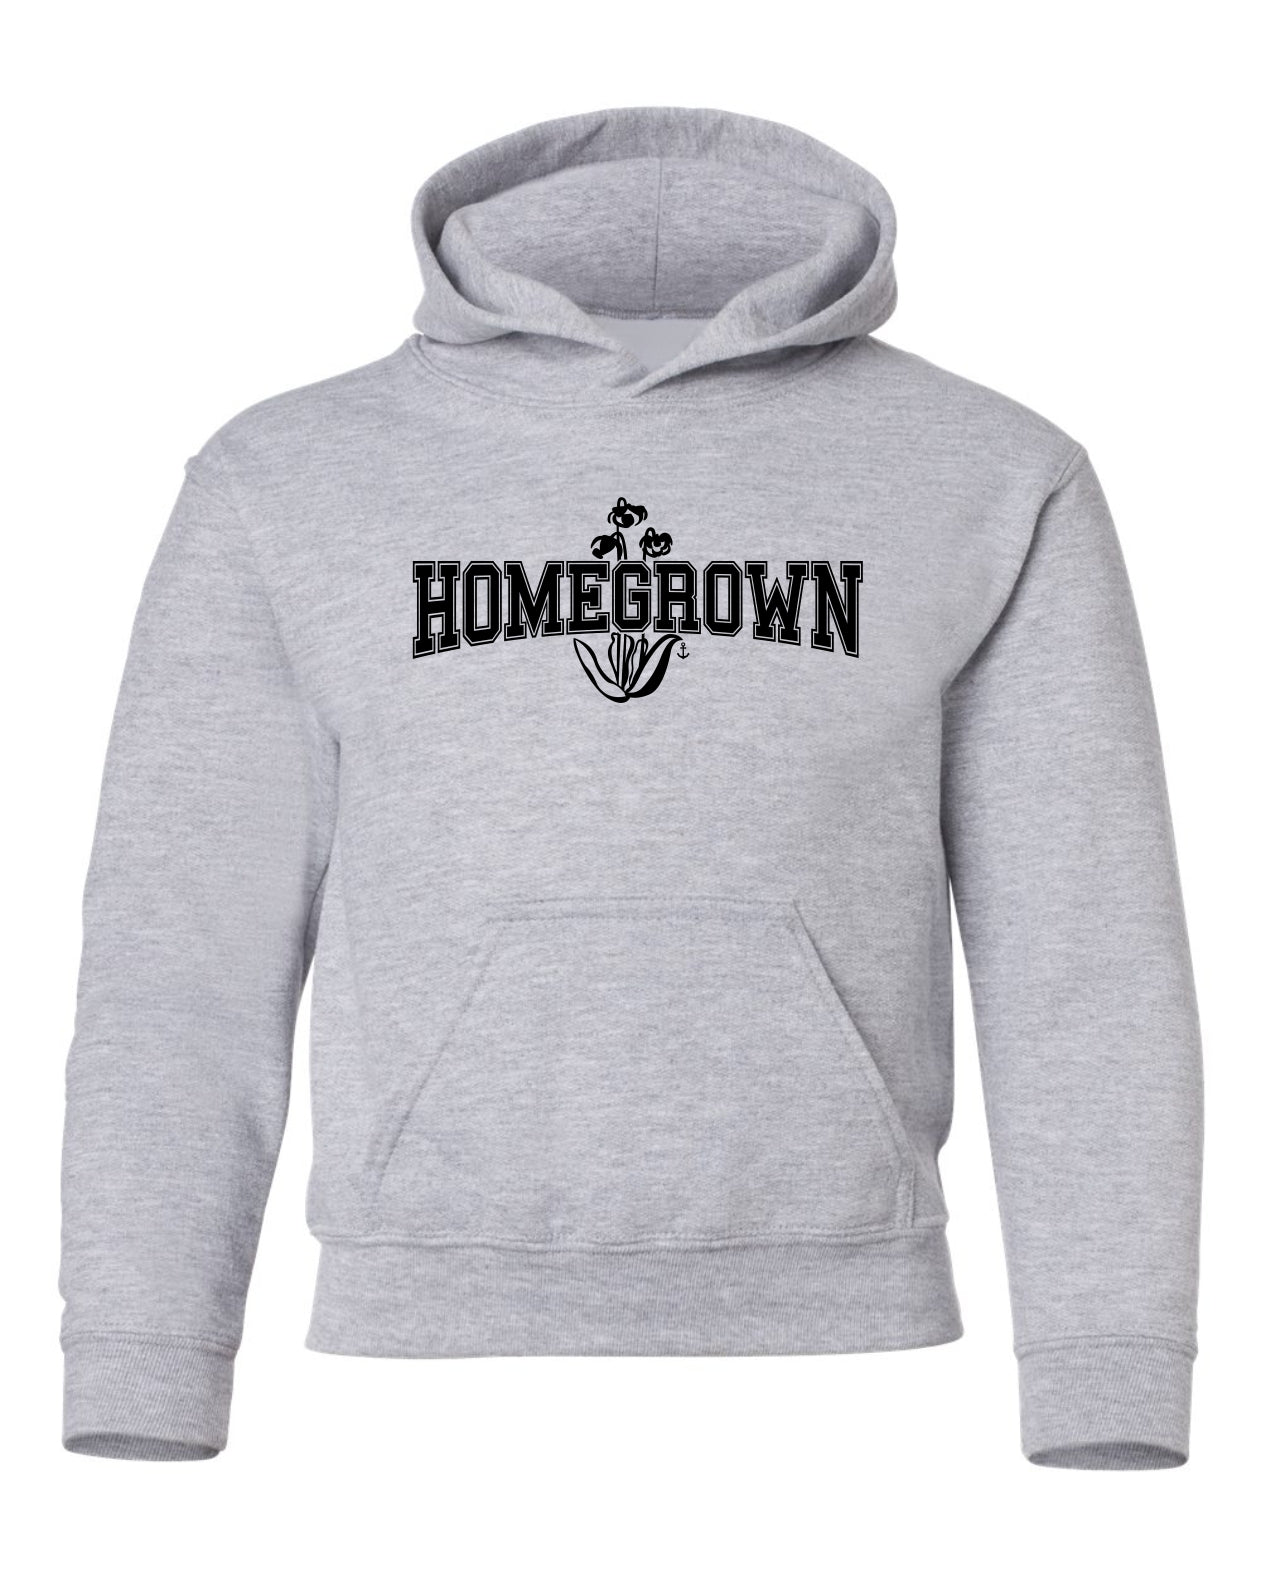 "Homegrown" Youth Hoodie